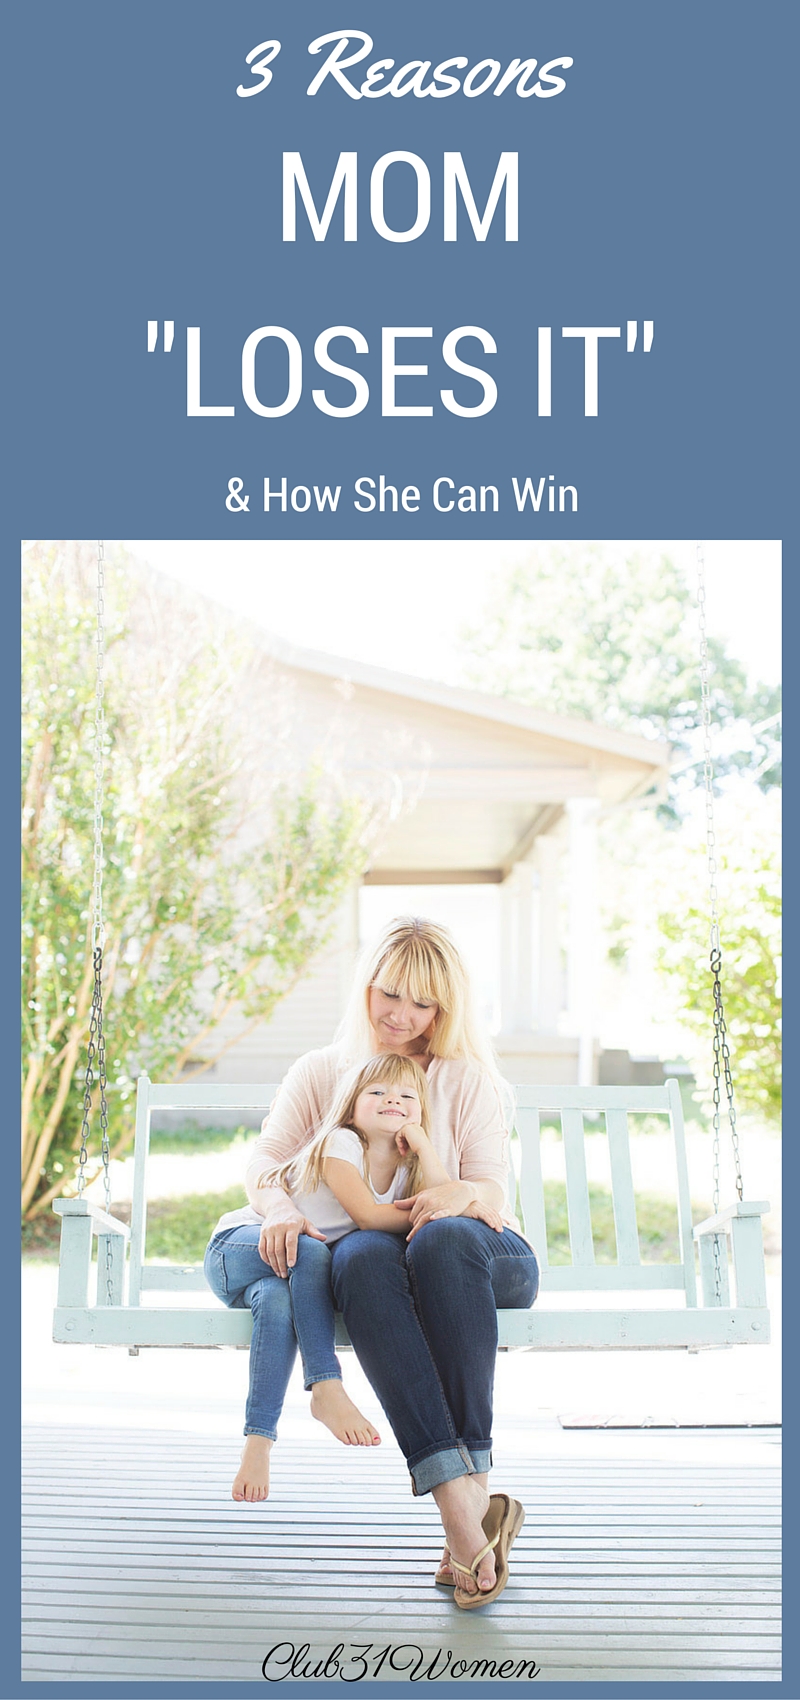 Are you the mom who "loses it" with her kids? Frustrated by their behavior and your response? Here are 3 winning strategies that will make a big difference! via @Club31Women